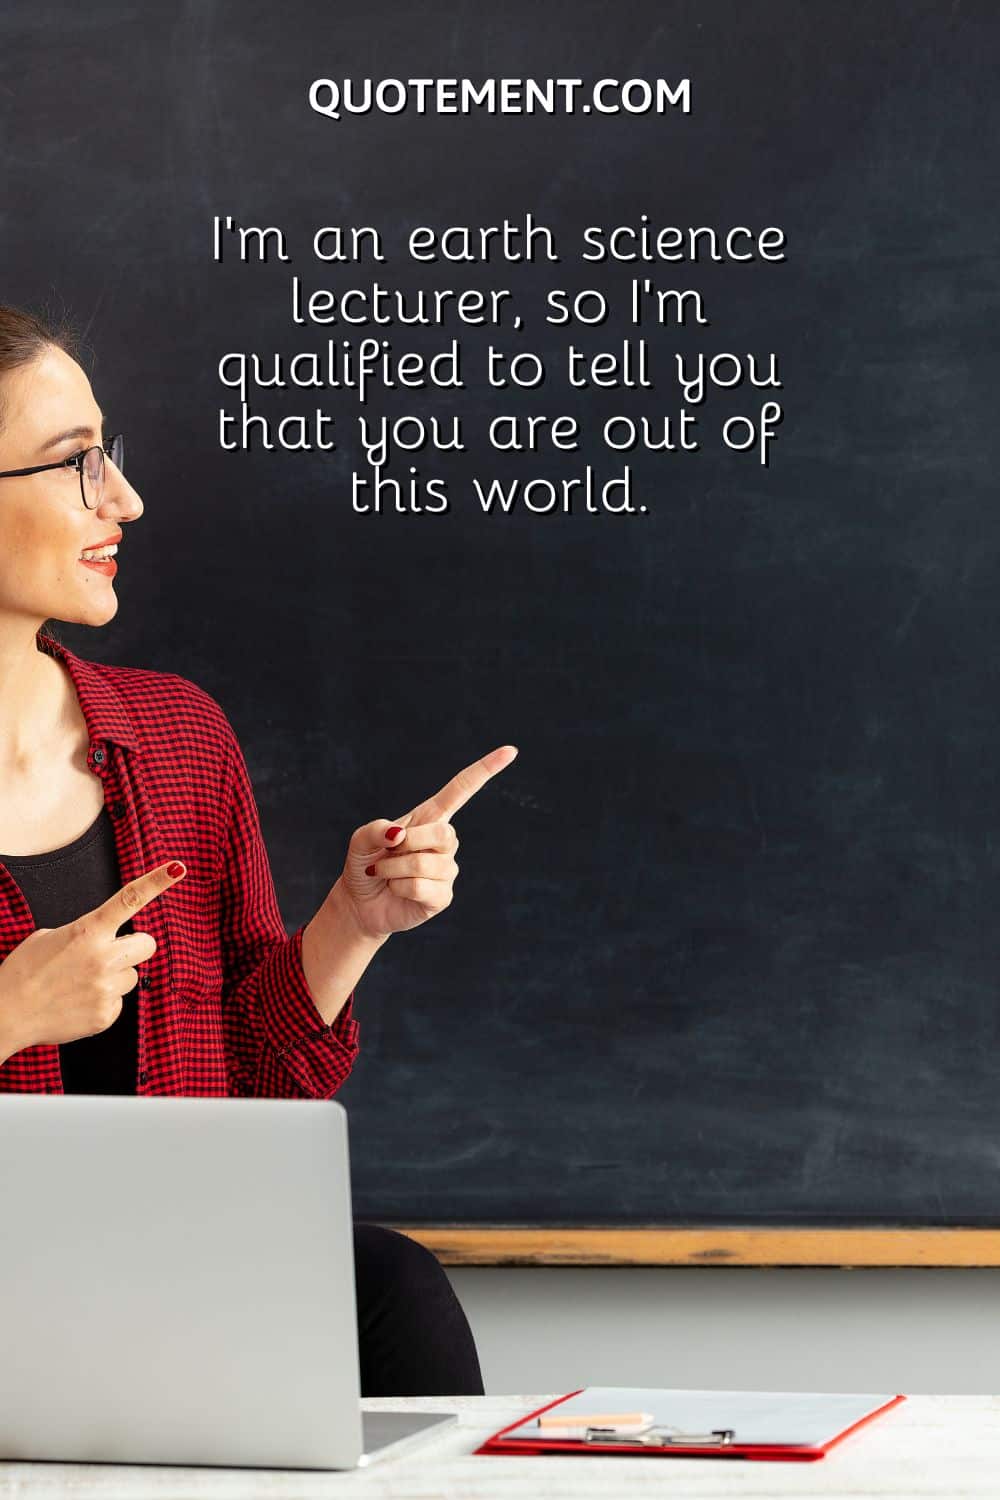 I’m an earth science lecturer, so I’m qualified to tell you that you are out of this world